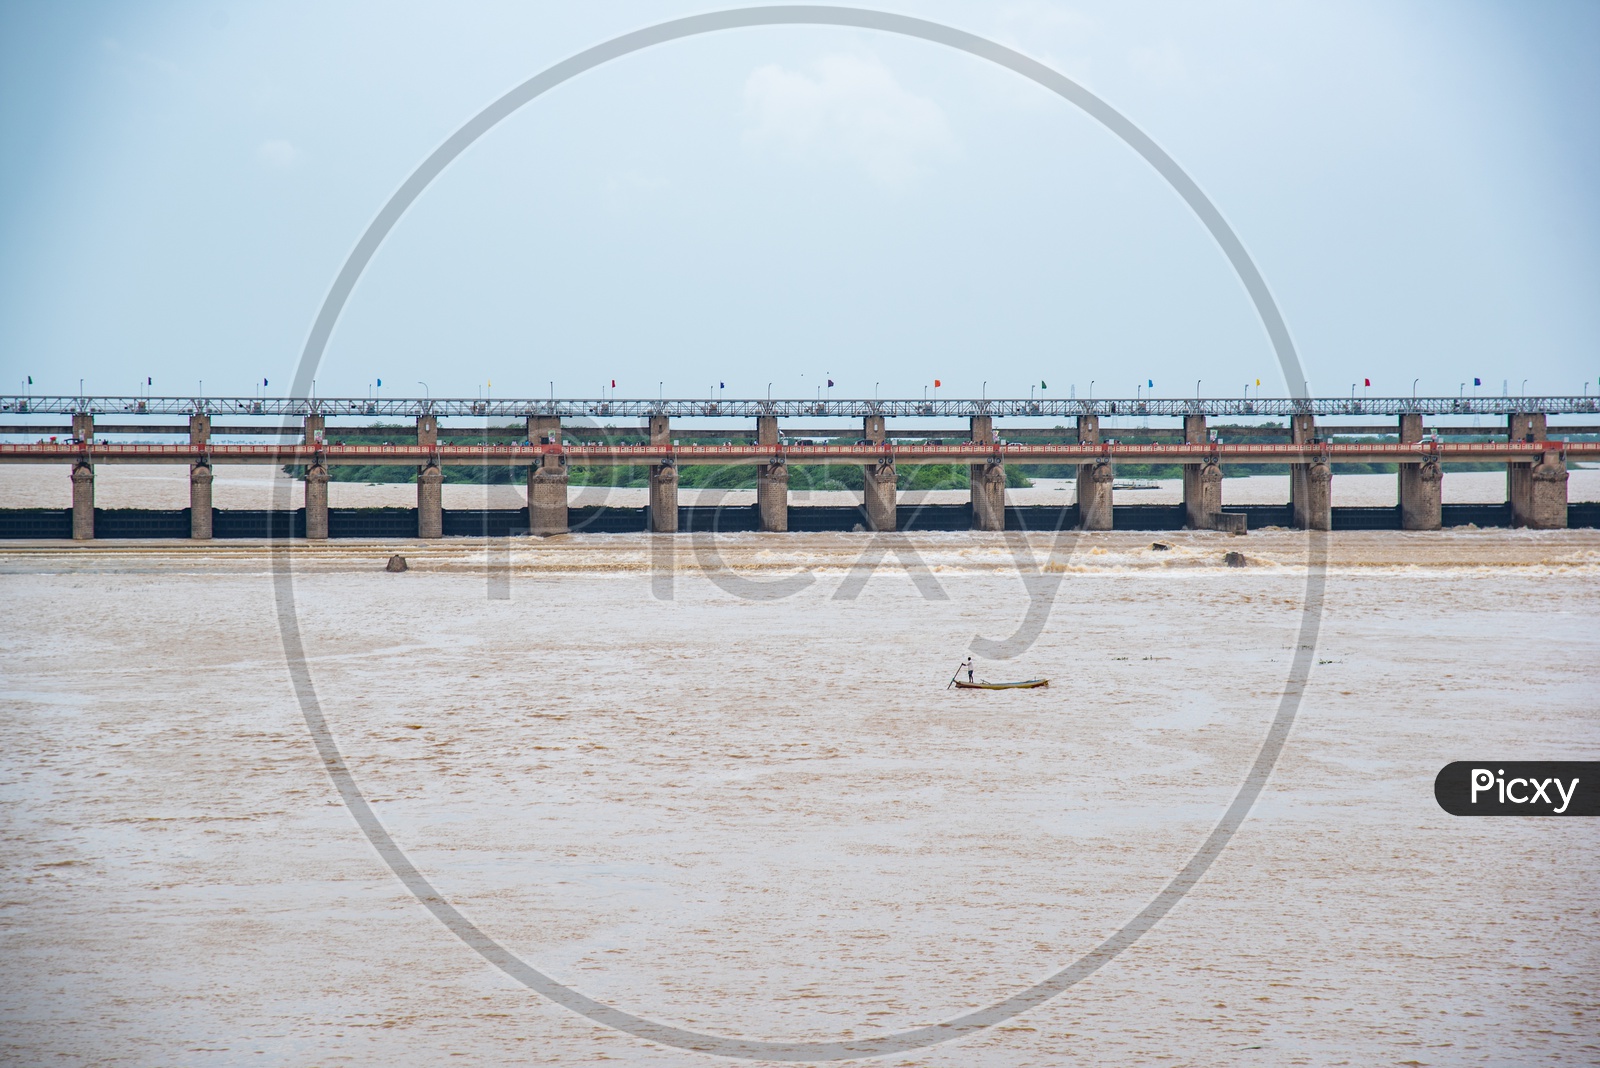 A fisherman rows his boat against the current of water at prakasam Barrage after the surplus water has been released into the sea